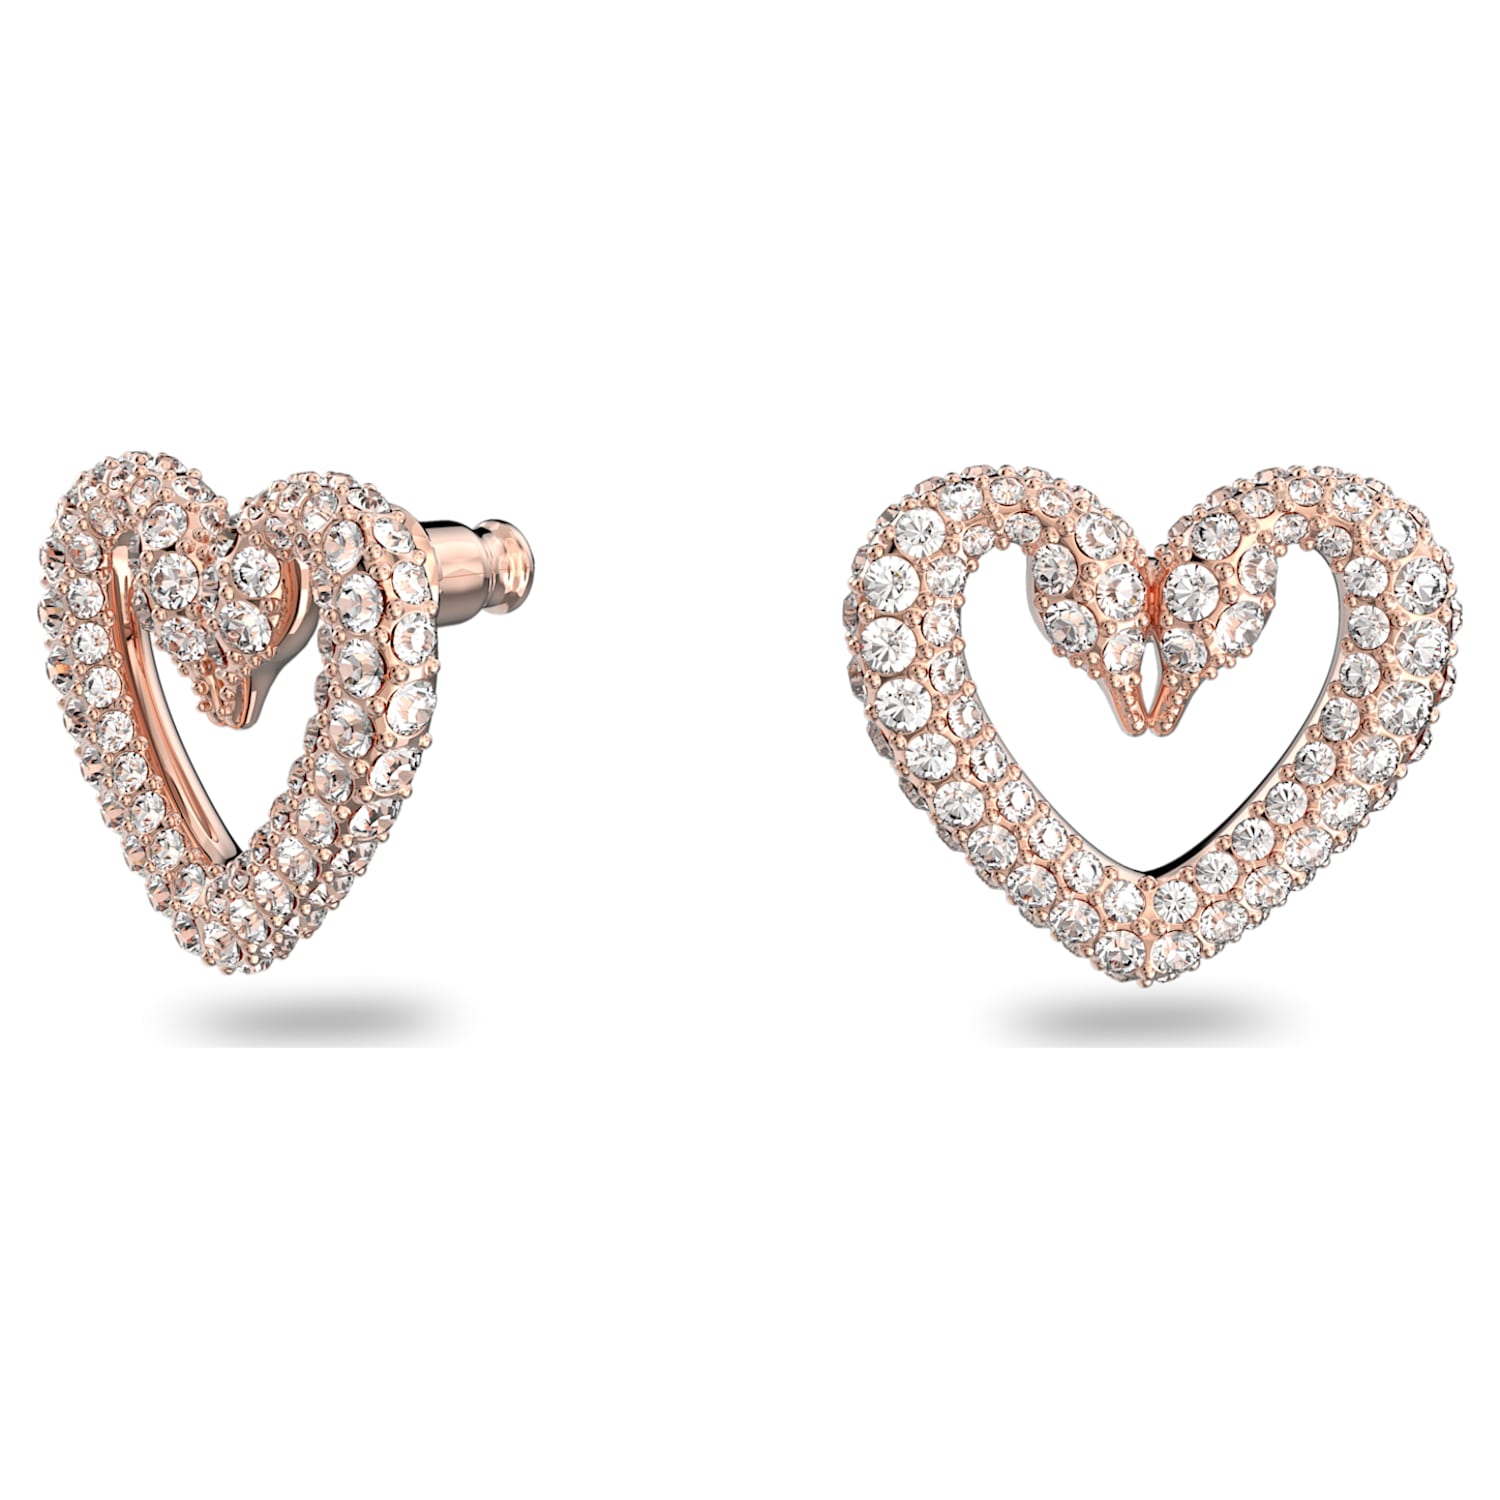 Una stud earrings, Heart, Small, White, Rose gold-tone plated